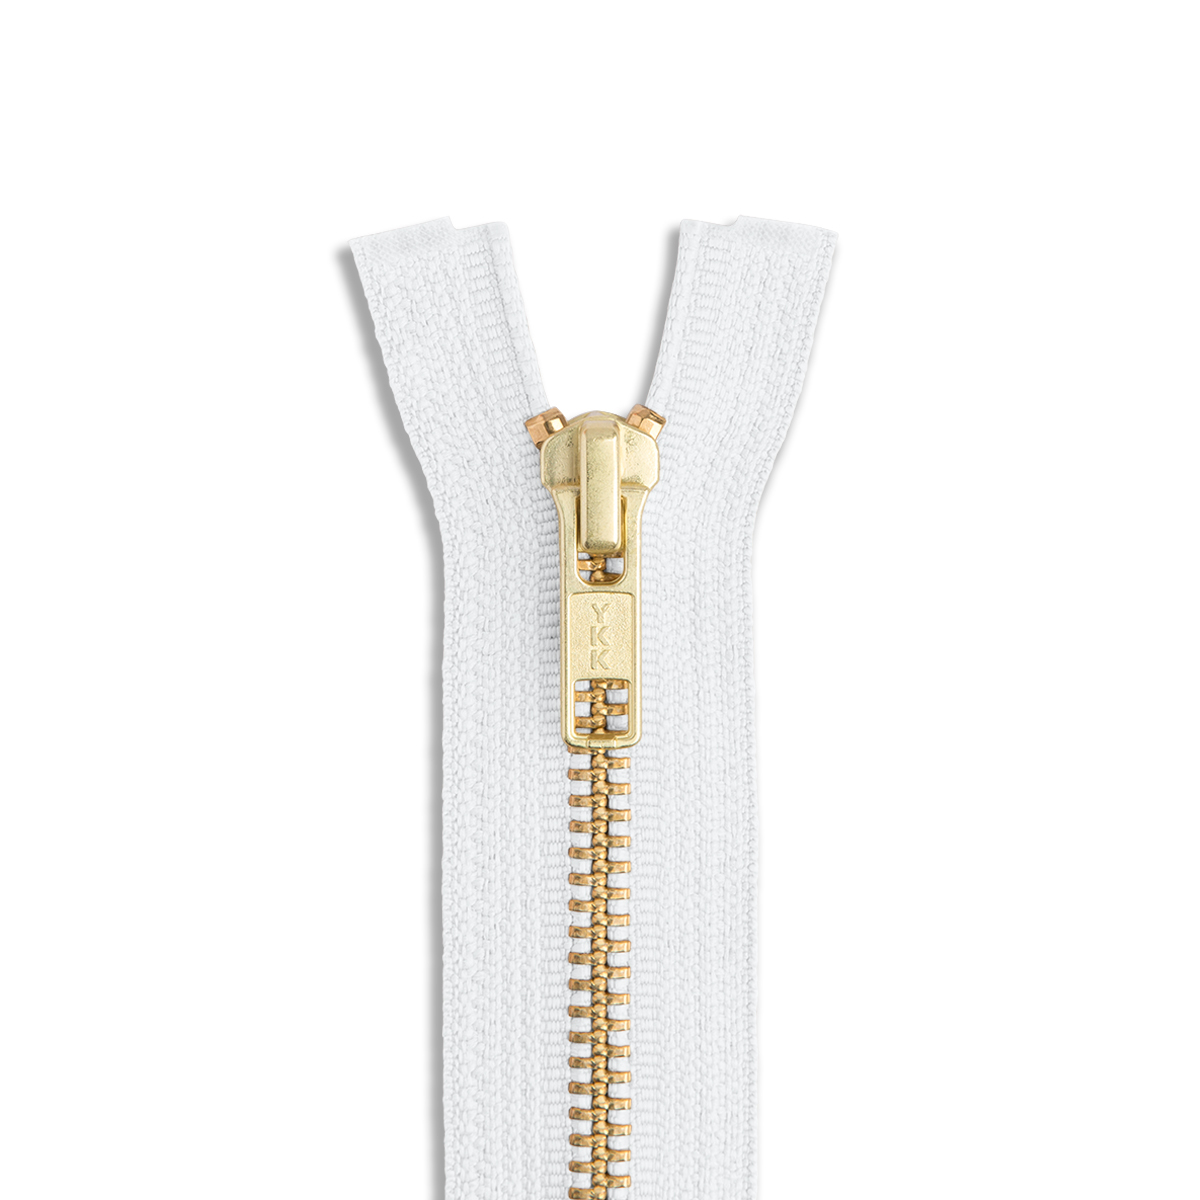 YKK #5 Brass Complete Zipper White / 4 (102 mm) from Tandy Leather